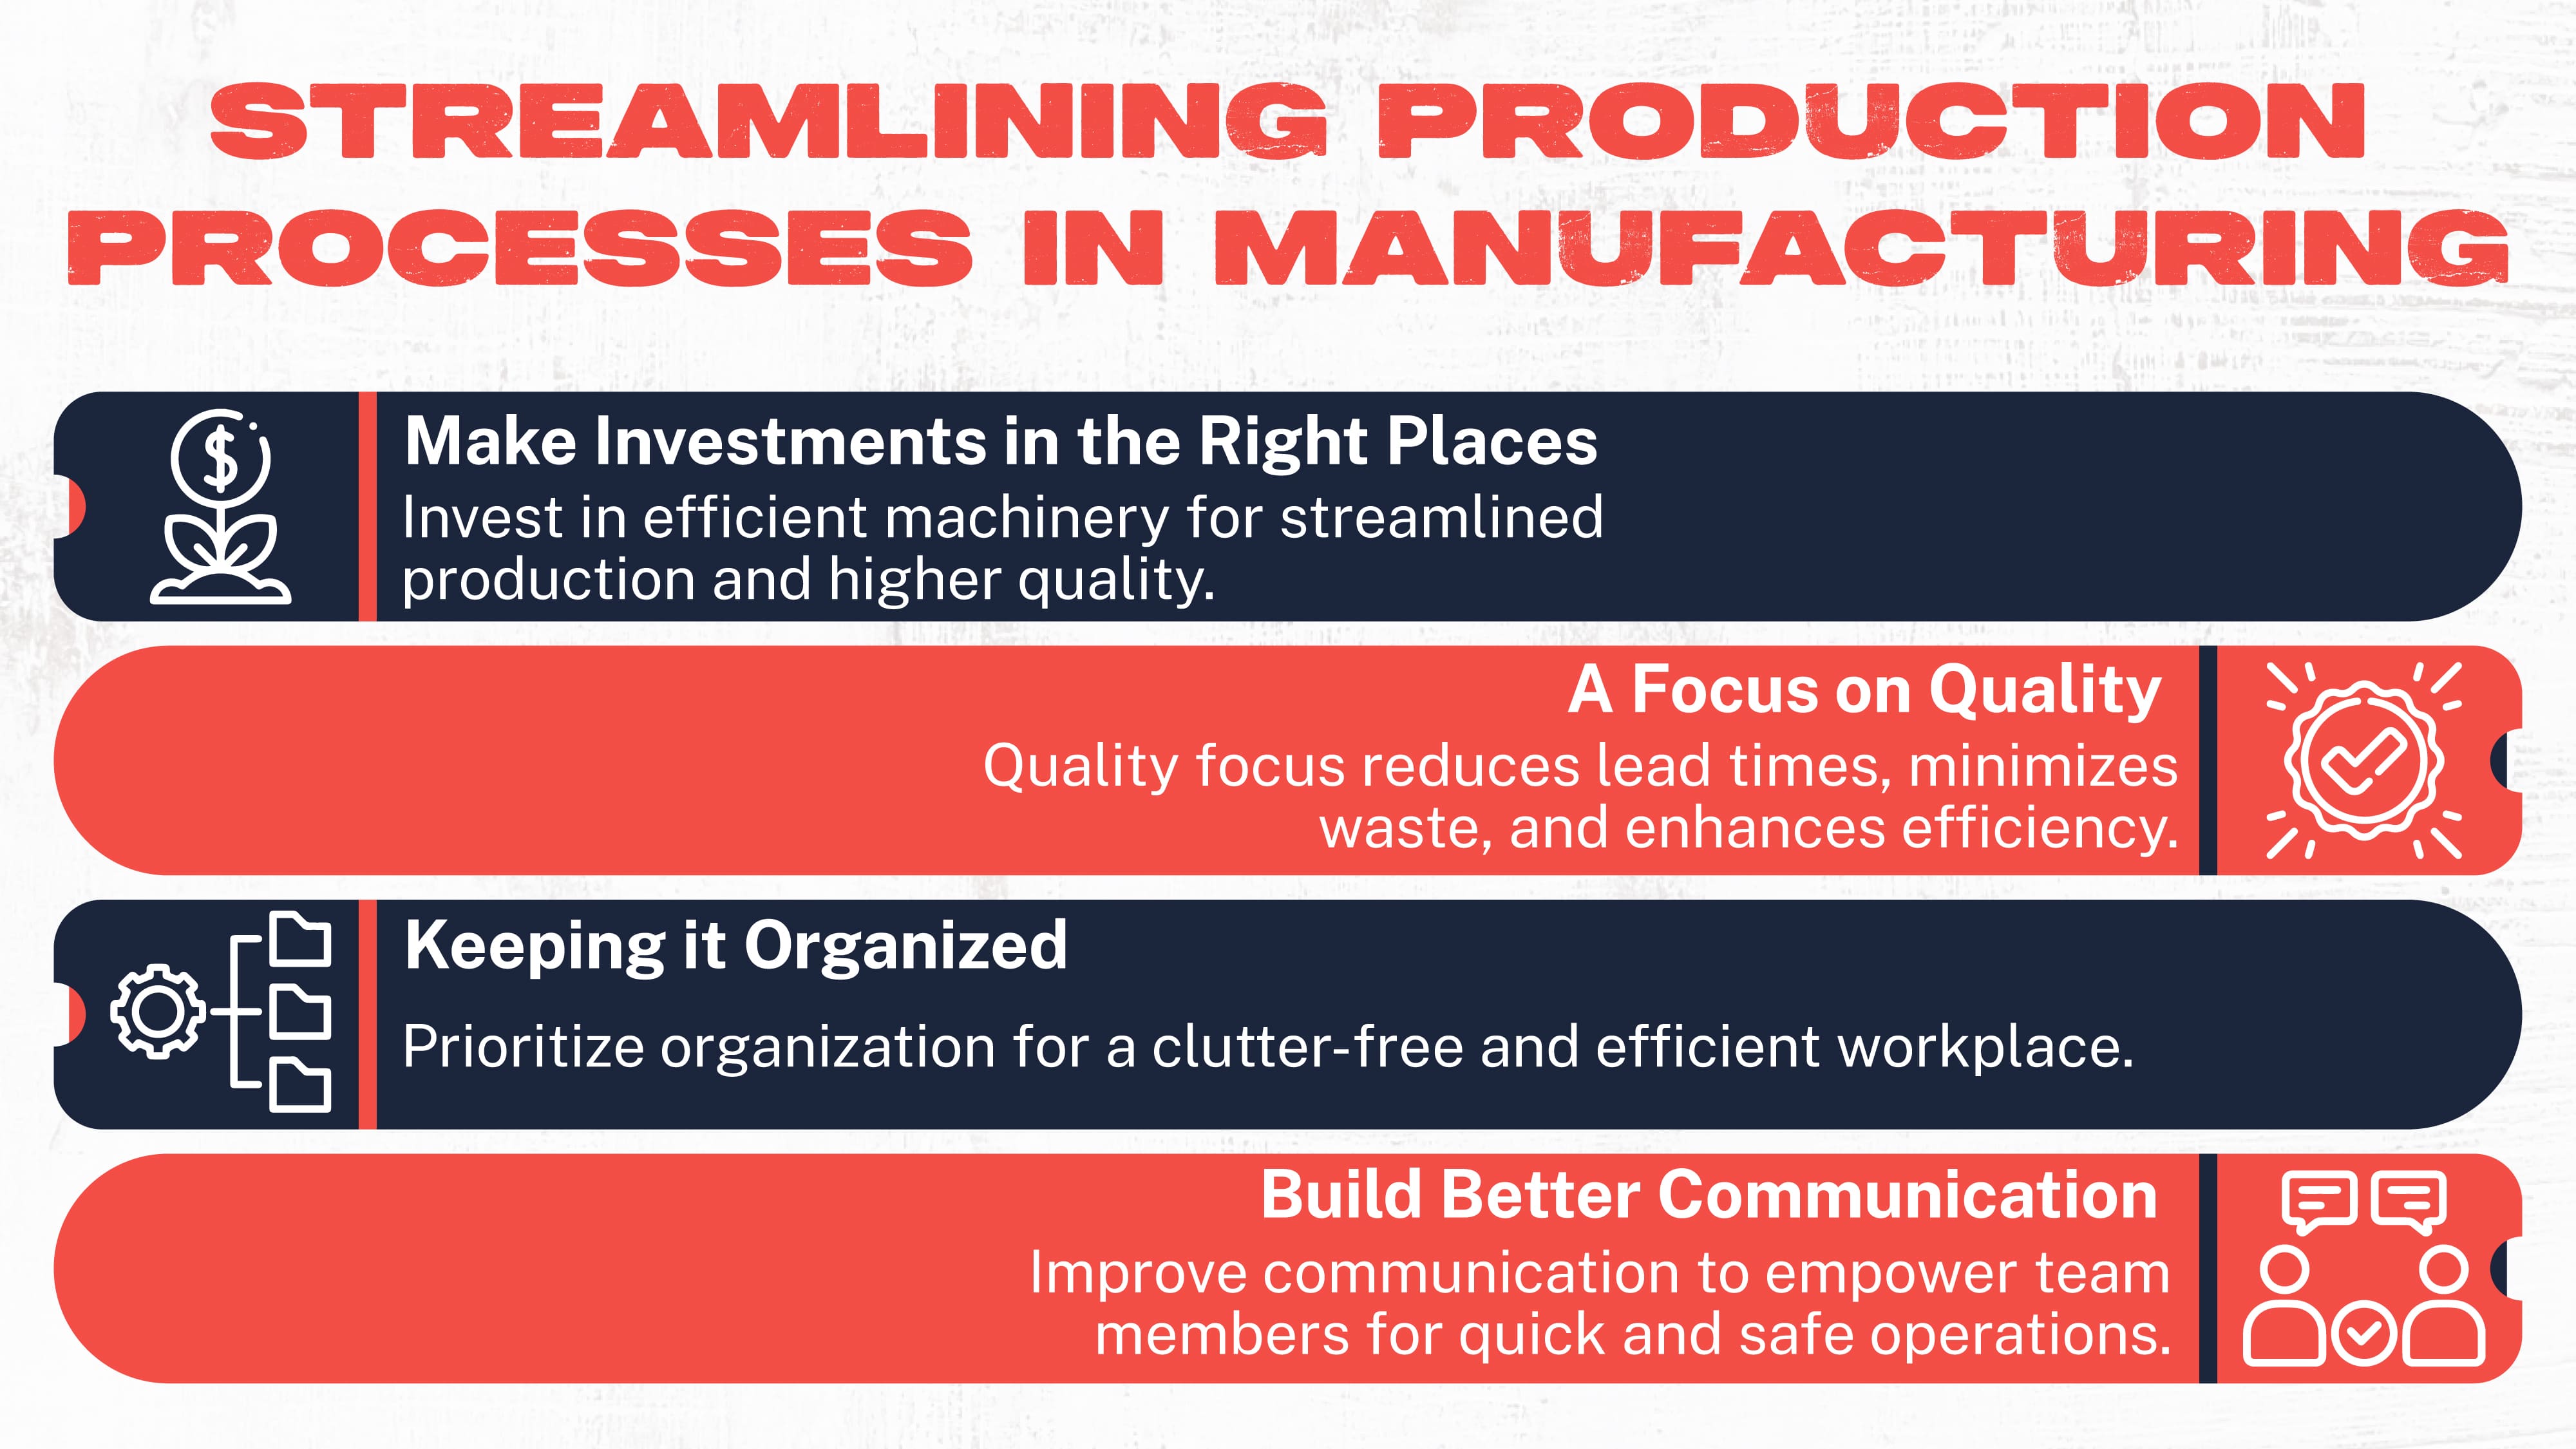 7 Streamlining Production Processes in Manufacturing